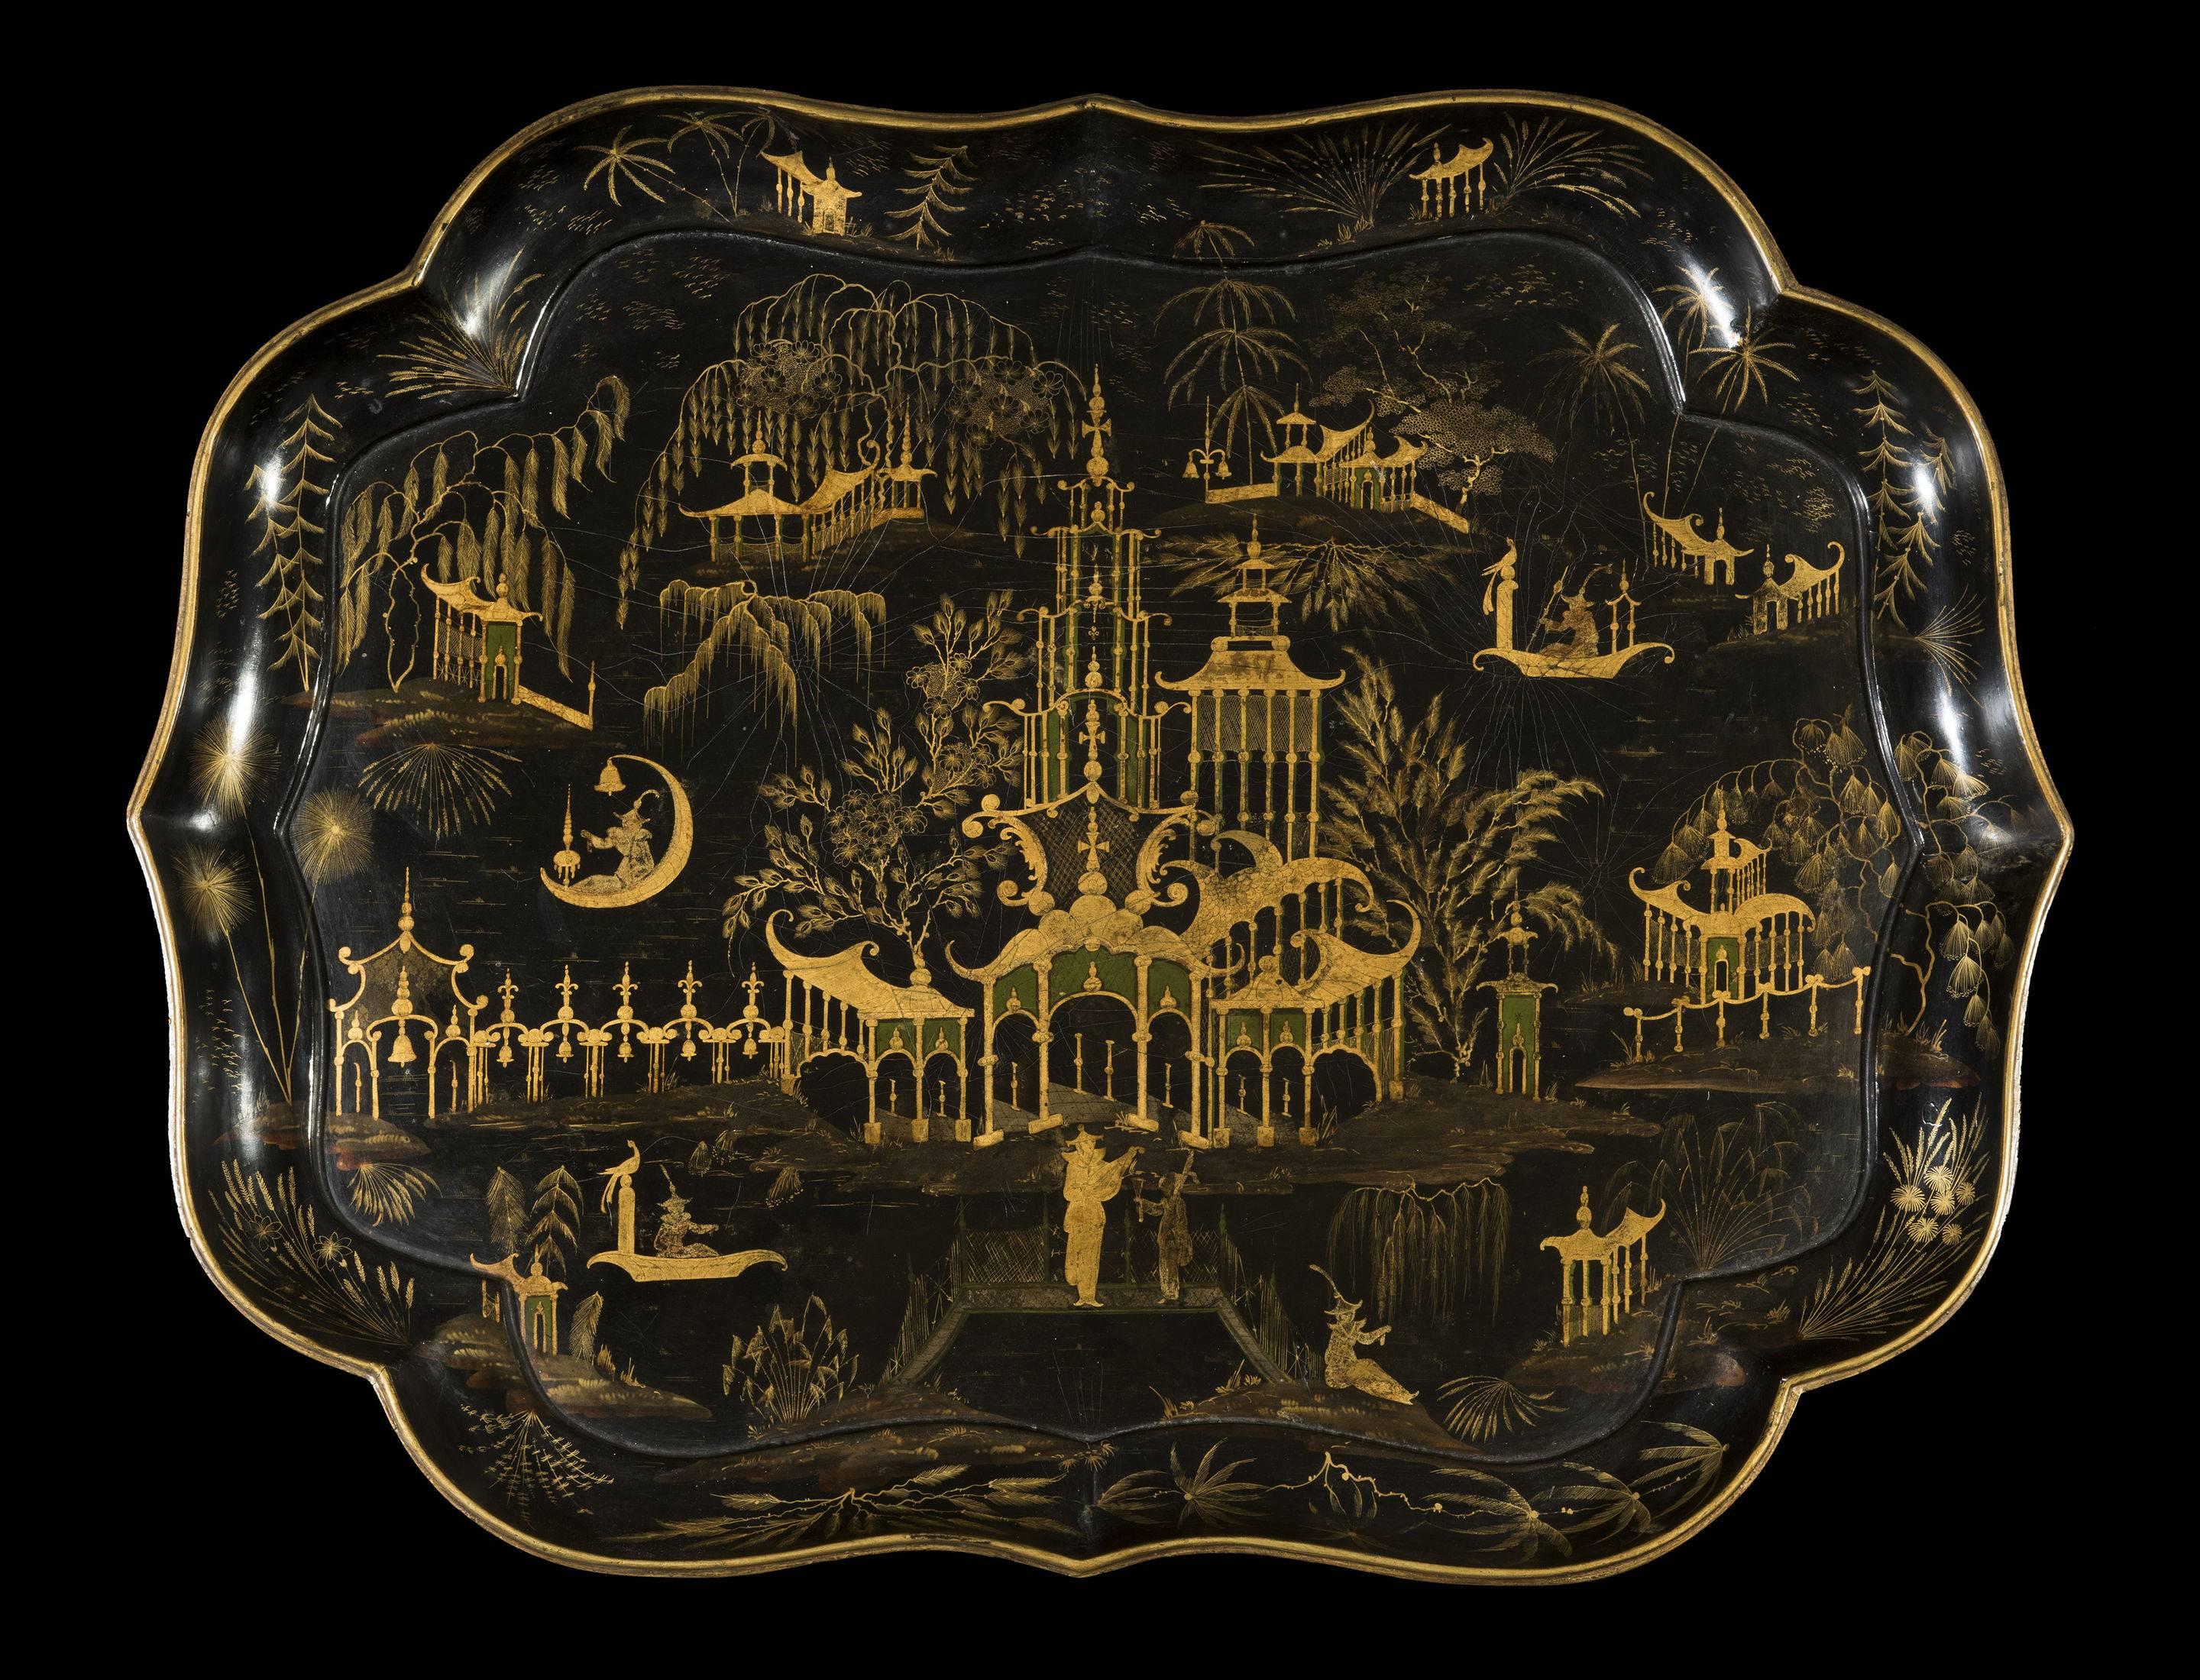 The shapely and finely decorated black papier-mâché tray with chinoiserie decoration is supported on a later ebonized faux-bamboo stand and can be easily detached. The gilt lacquer chinoiserie decoration is of the highest quality and depicts the far